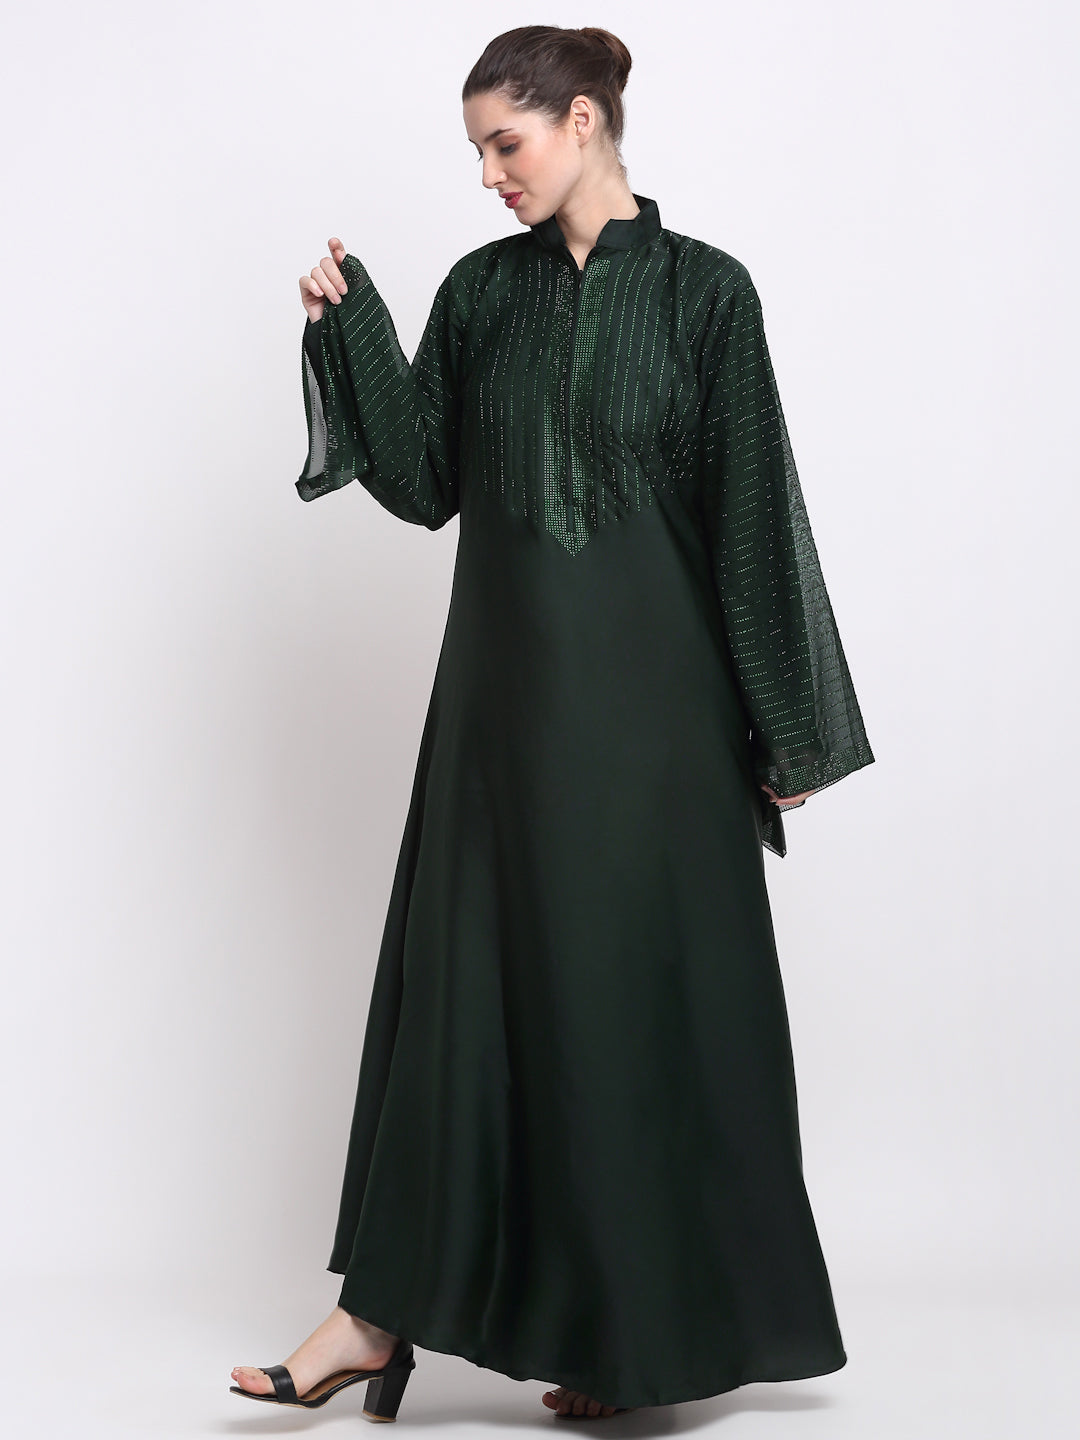 Klotthe Women Green Solid Burqa With Scarf